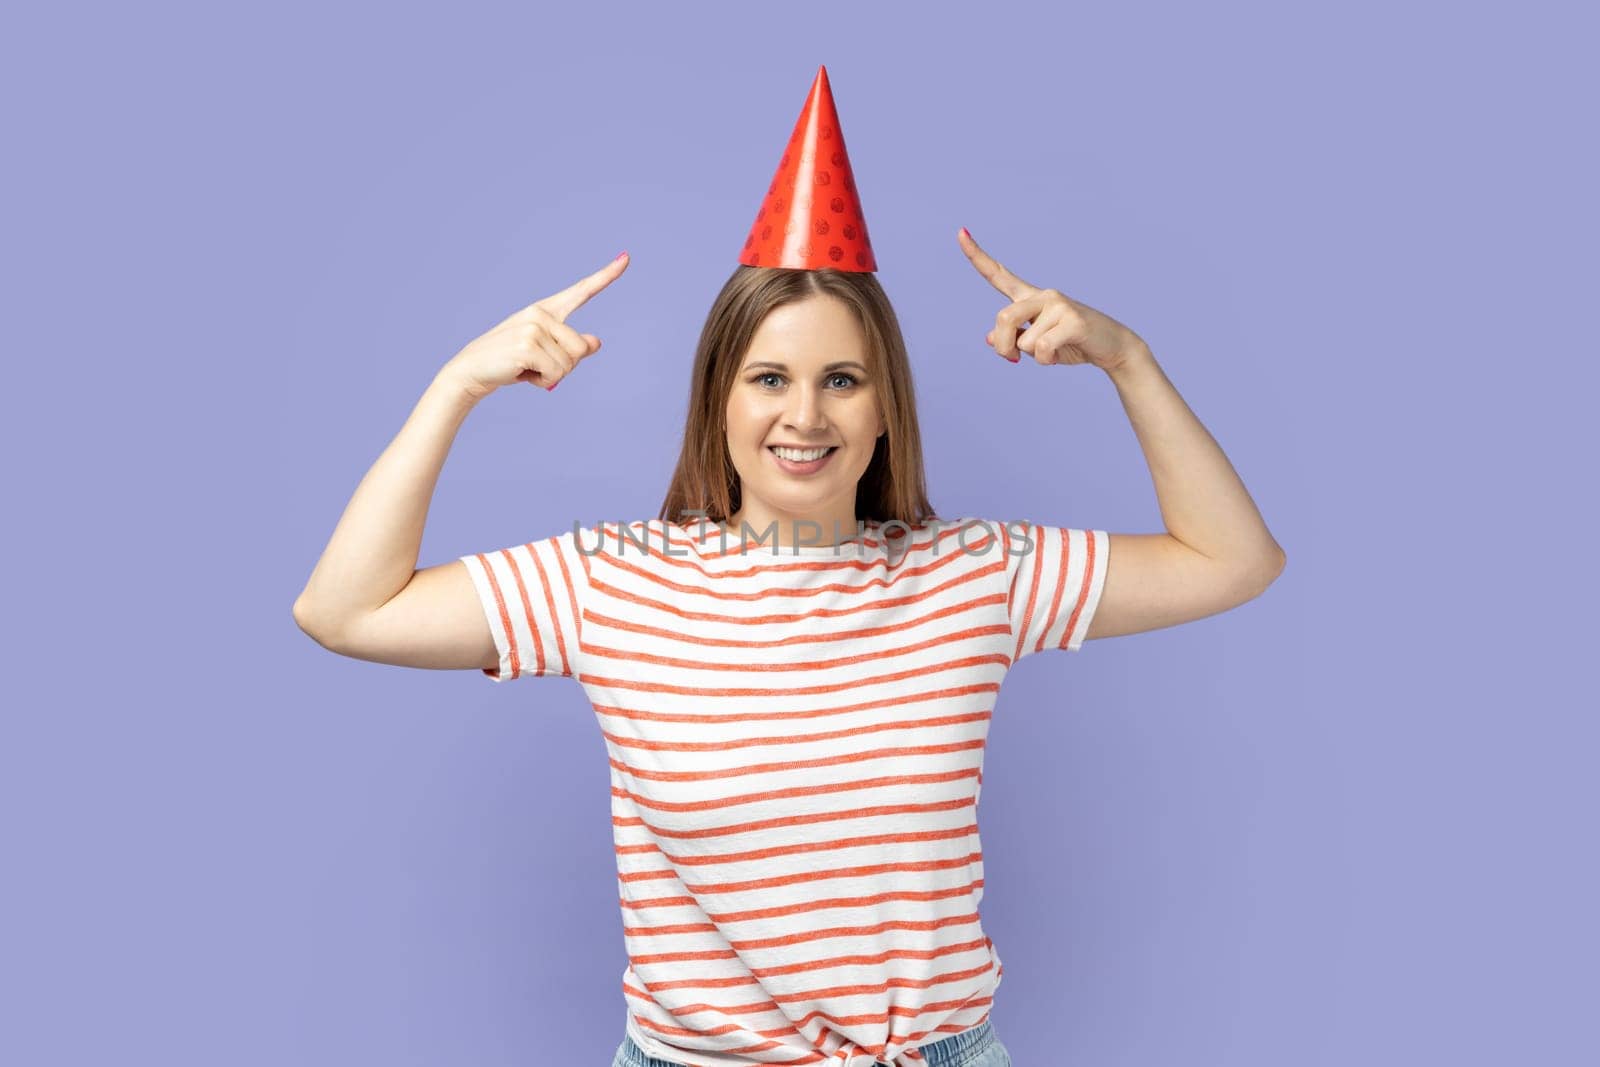 Woman pointing to funny party cone on head and smiling to camera, celebrating career growth. by Khosro1